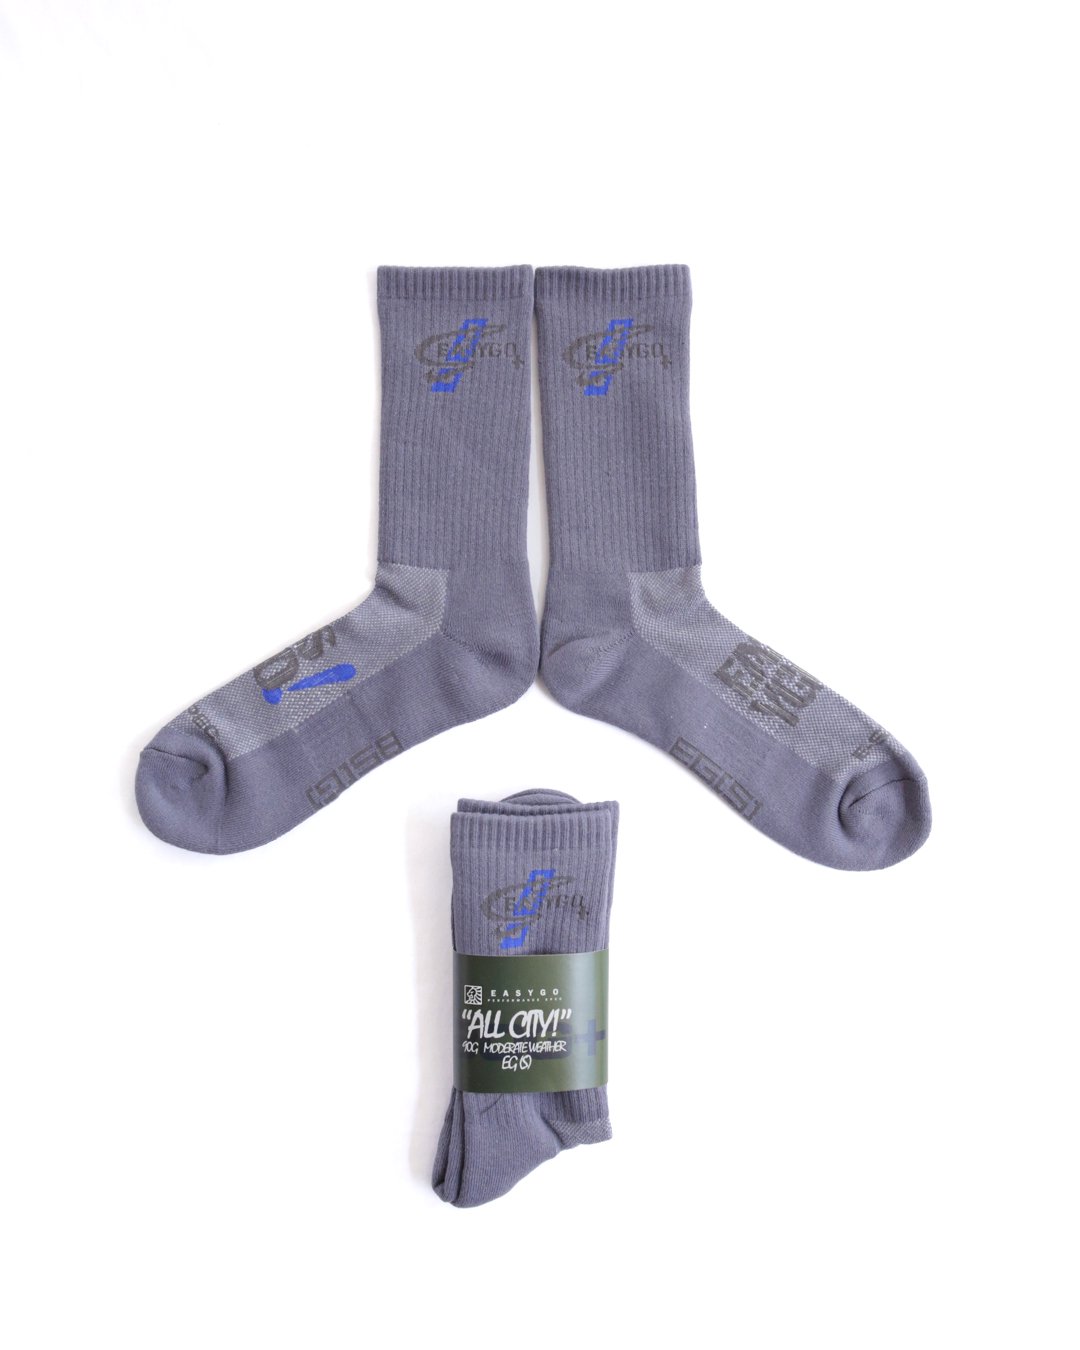 ALL CITY MODERATE WEATHER 85G PERFORMANCE SOCKS